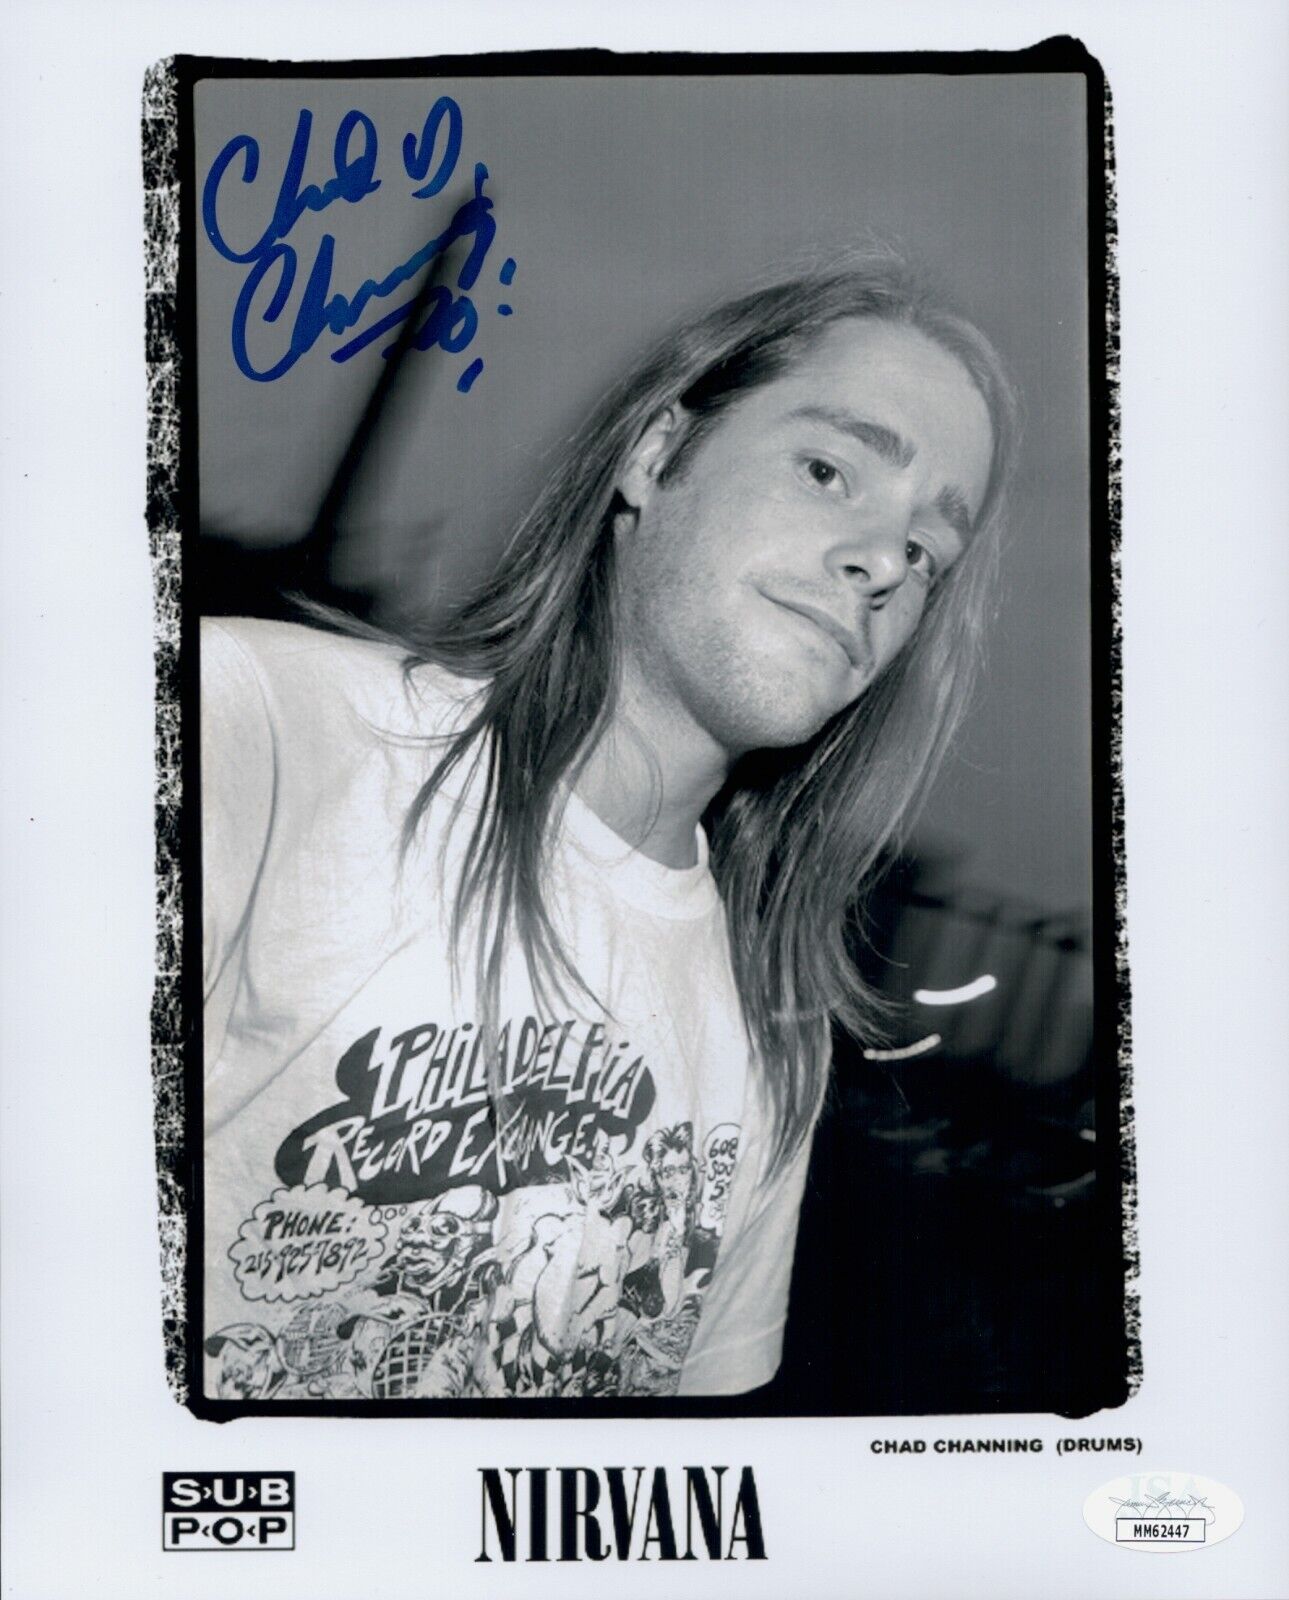 CHAD CHANNING Signed NIRVANA 8x10 Photo Poster painting IN PERSON Autograph JSA COA Cert